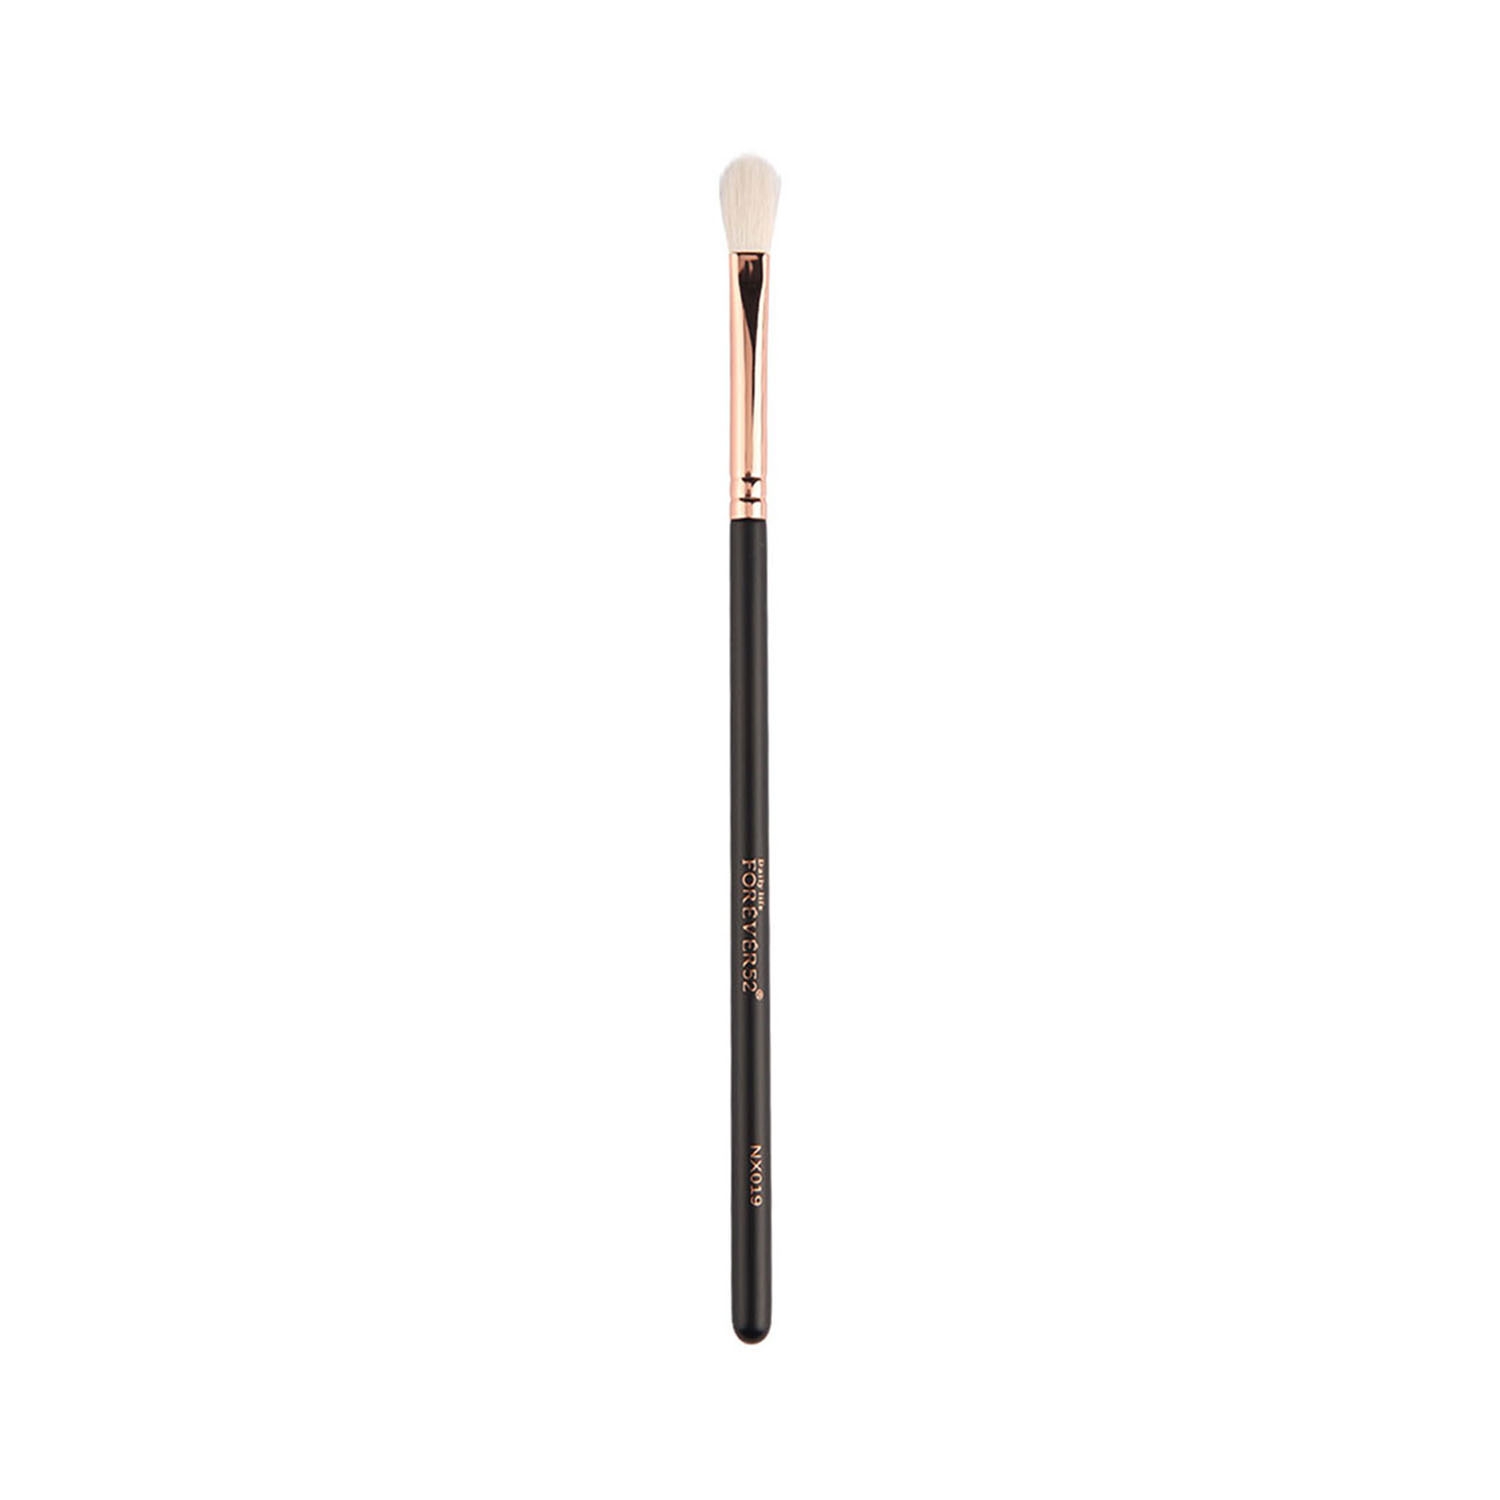 Daily Life Forever52 | Daily Life Forever52 Eye Shadow Brush - NX019 (1Pc)